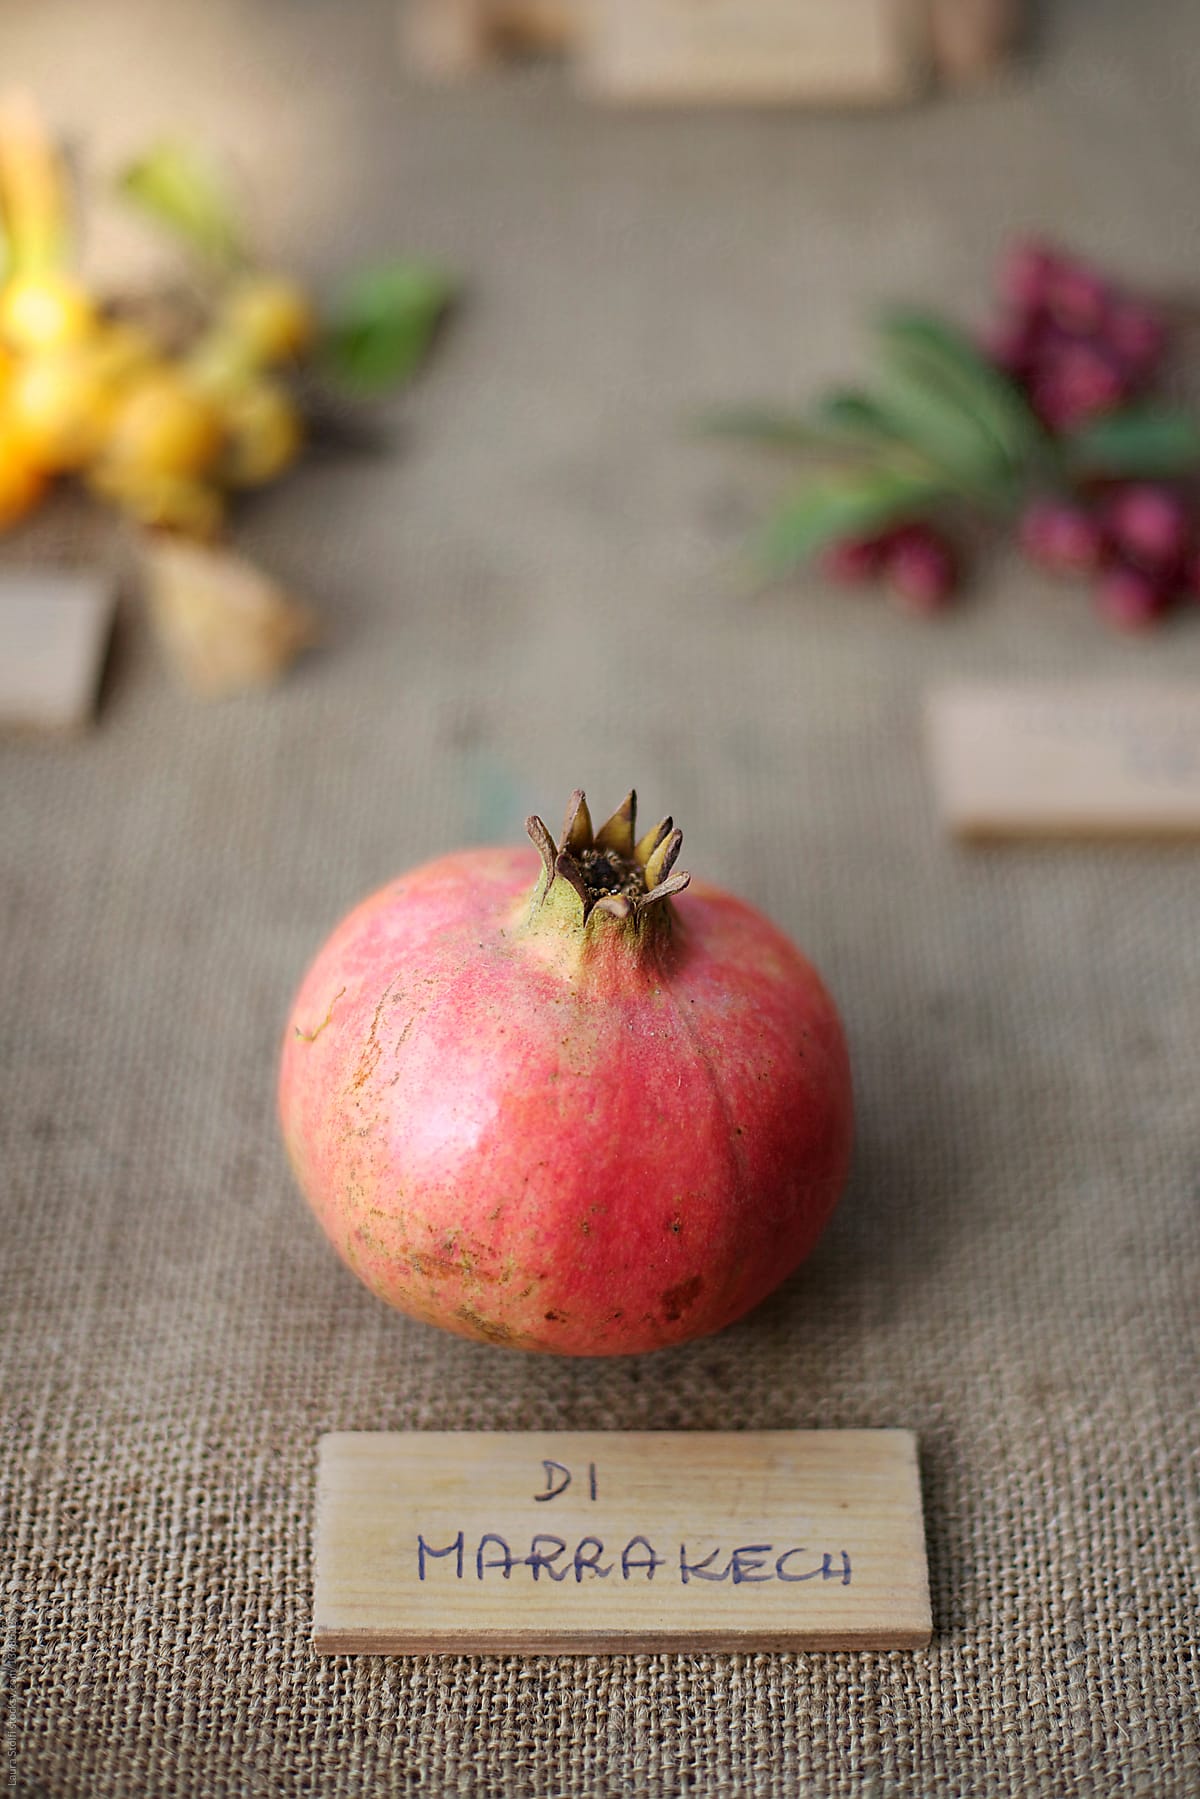 Marrakech pomegranate and wooden label spelling its name on table at rare fruits fair